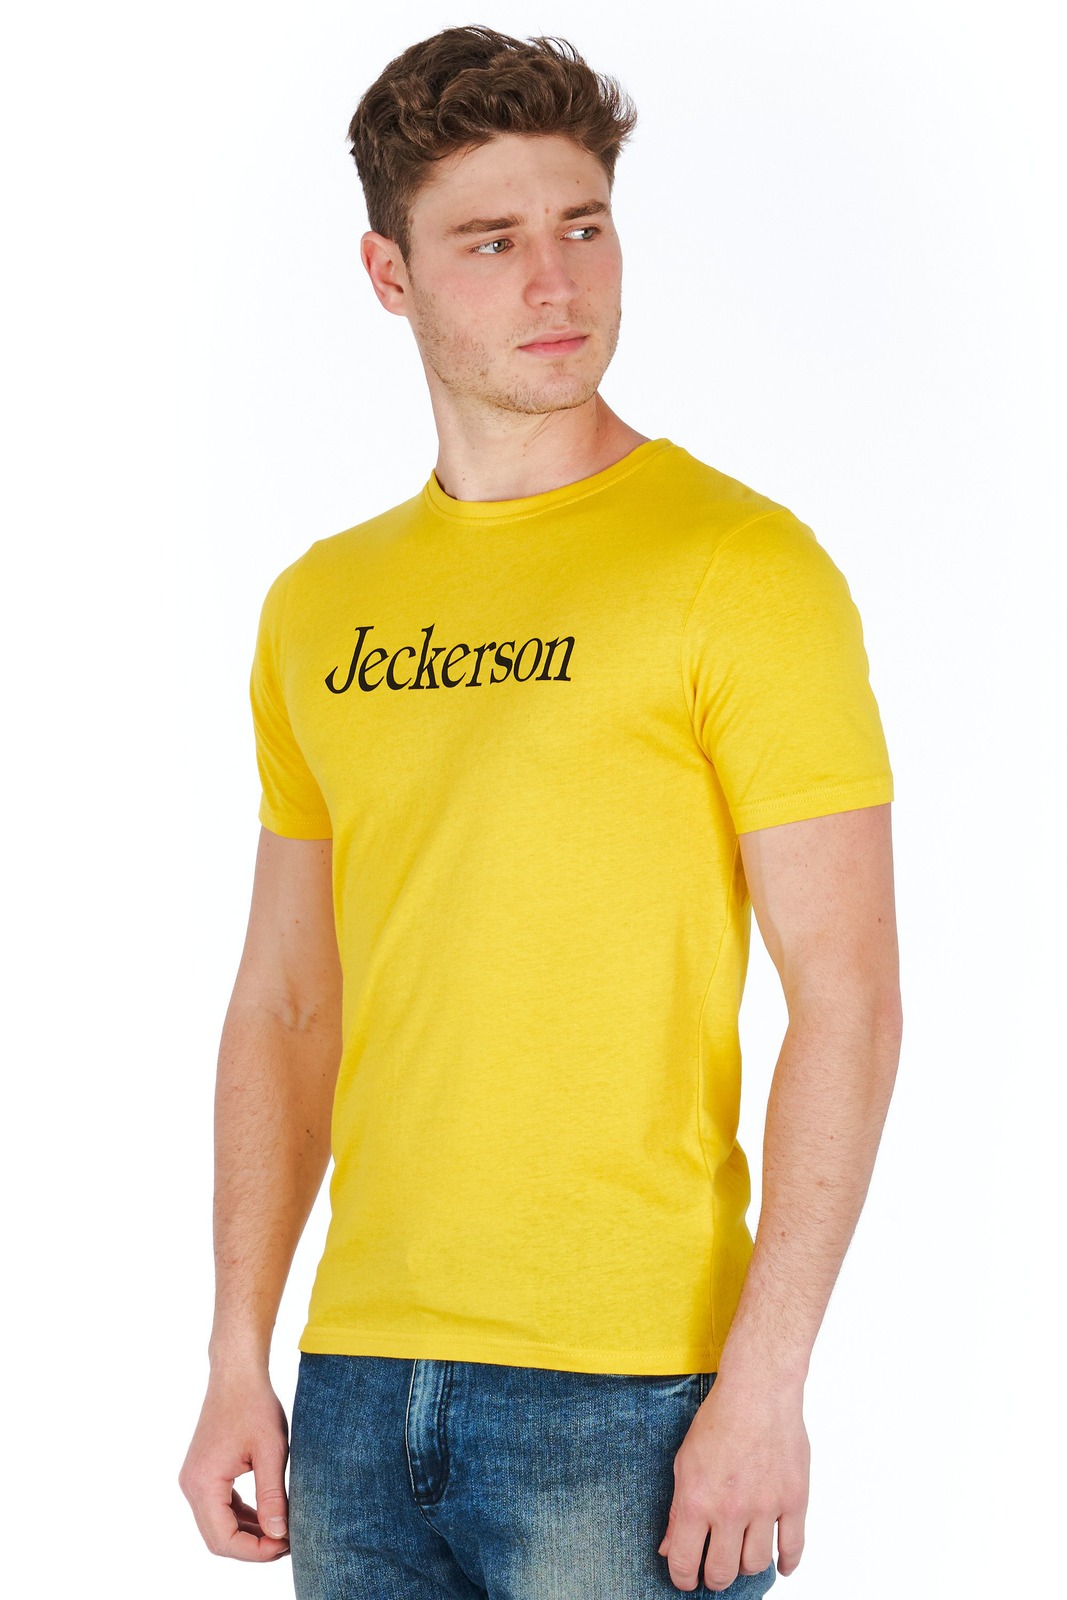 Jeckerson Yellow T-shirts for Men - CLASSIC